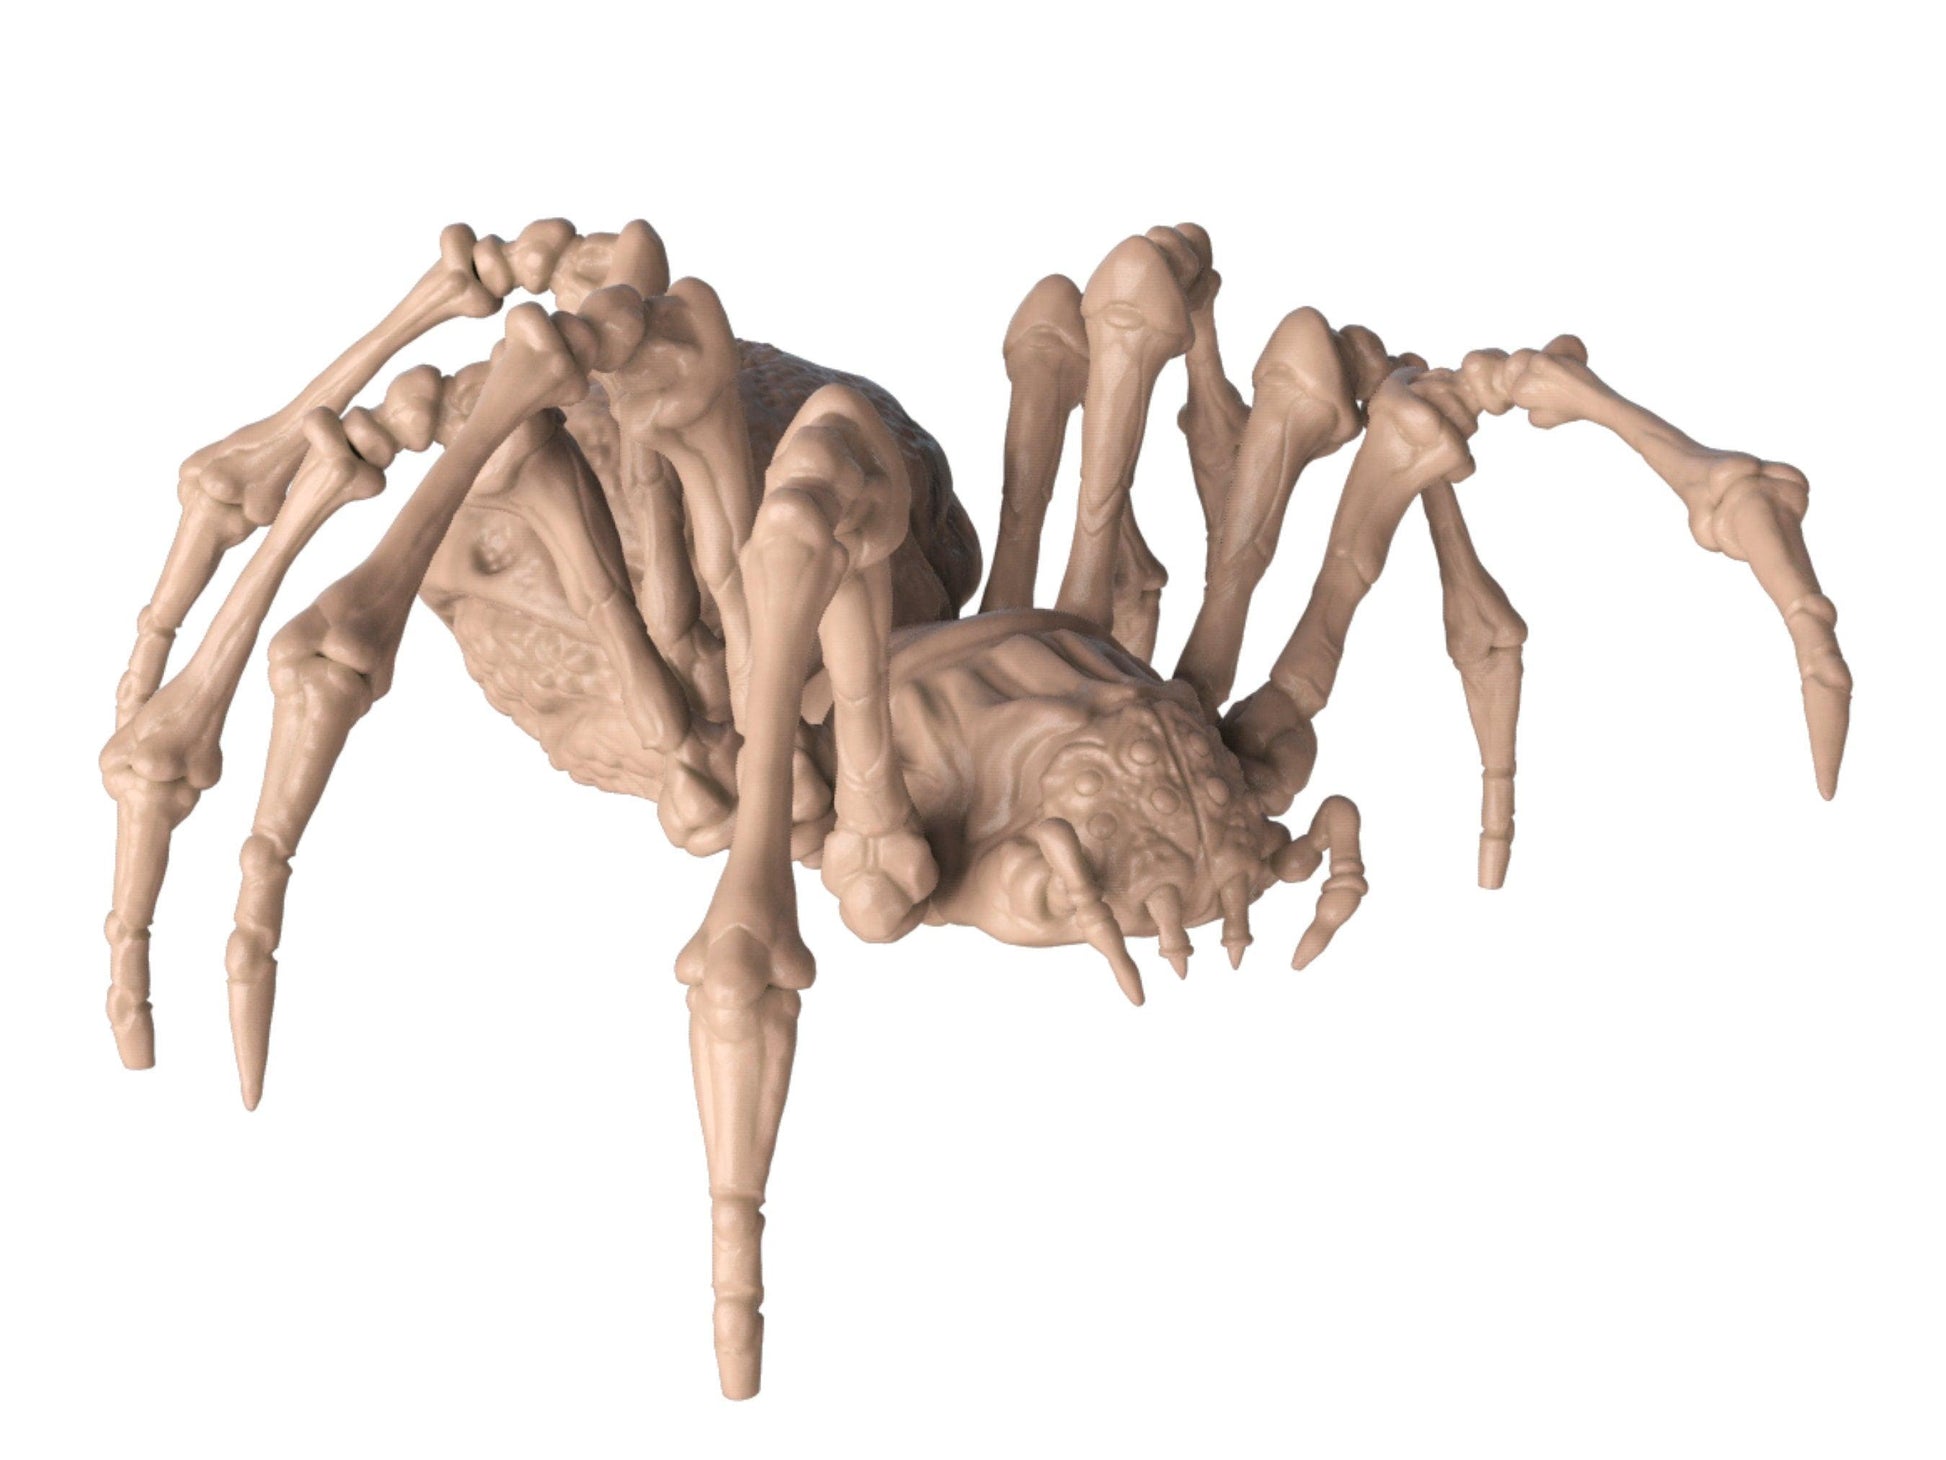 Giant Spider Miniature - 4 Poses - 32mm scale Tabletop gaming DnD Miniature Dungeons and Dragons,dnd monster manual - Plague Miniatures shop for DnD Miniatures